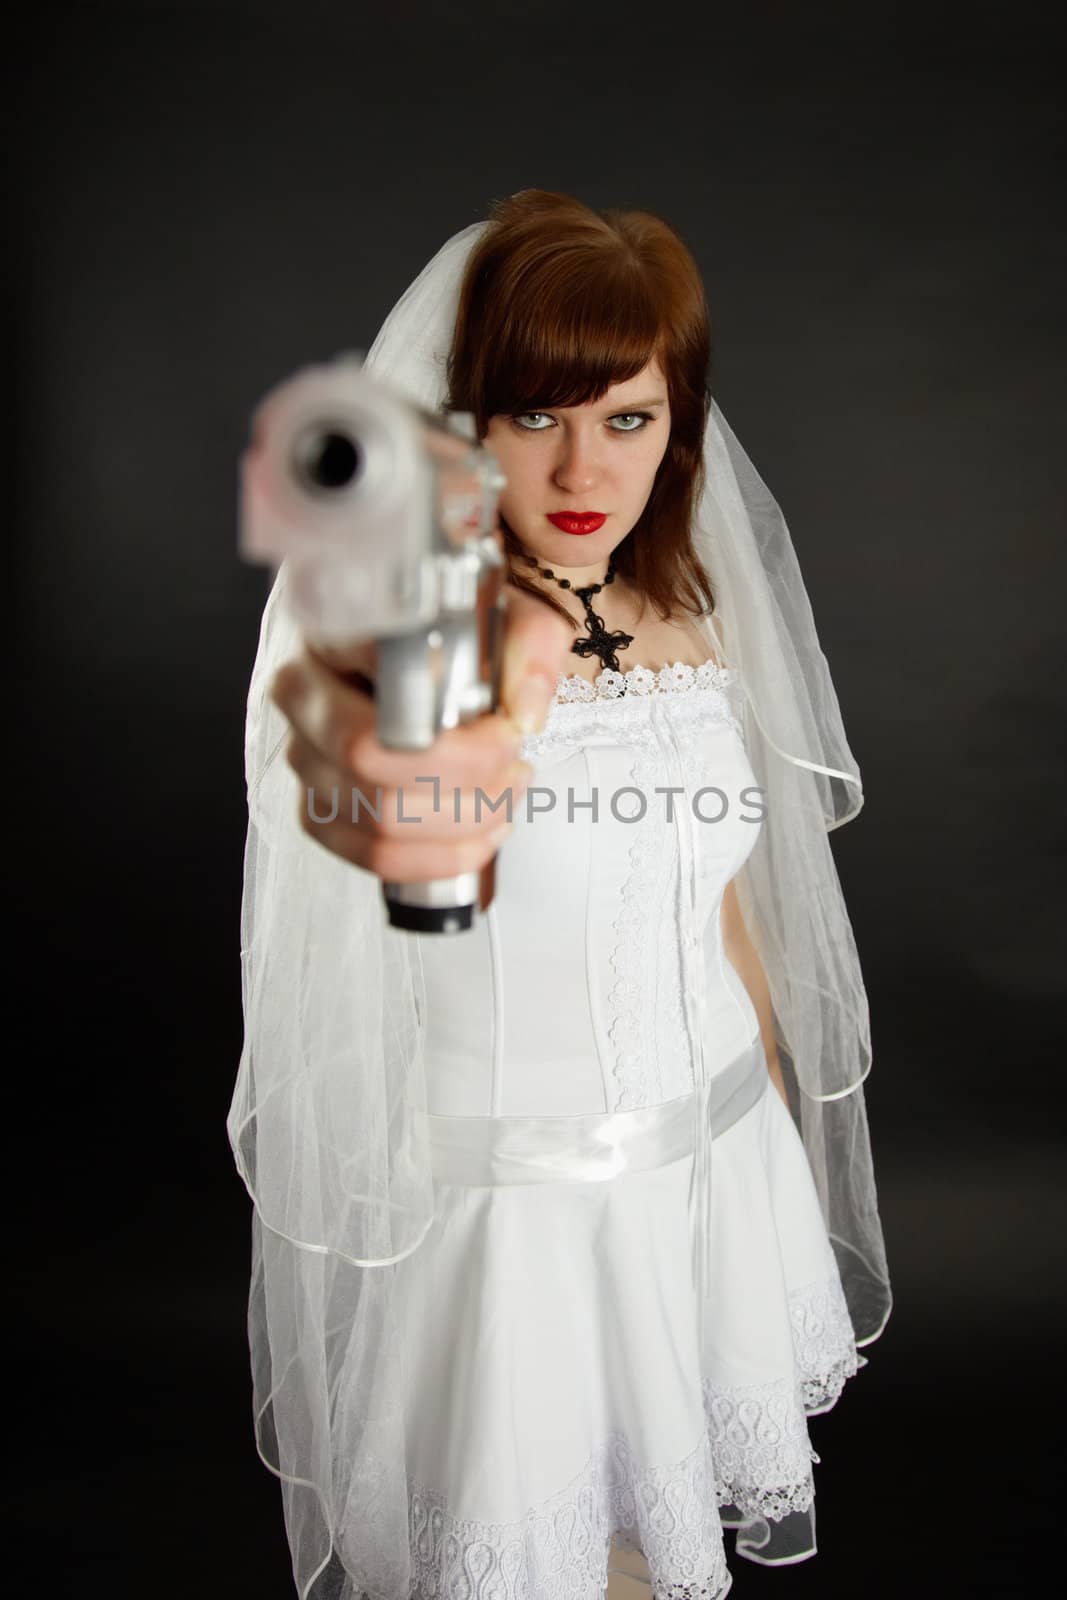 Young bride threatens us with a gun by pzaxe